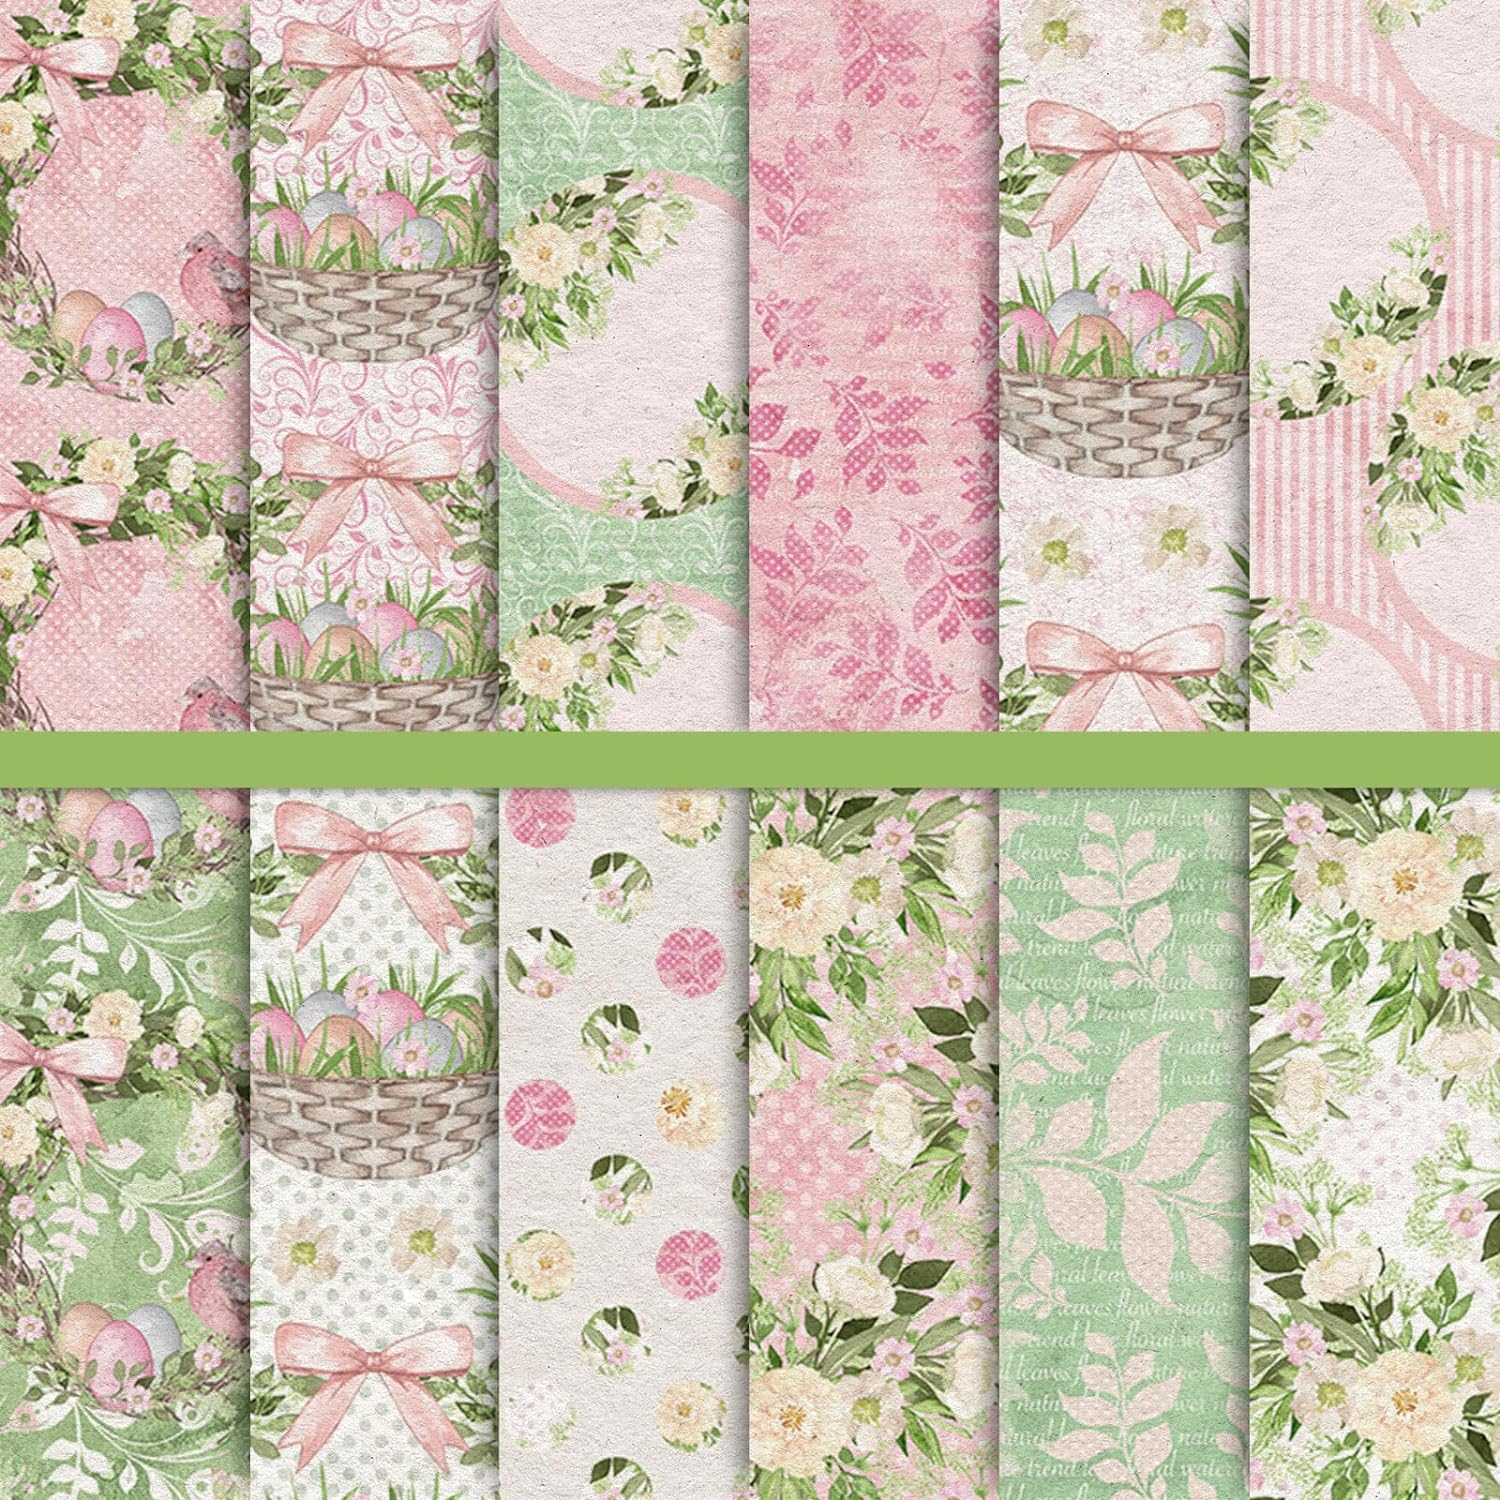 Whaline 12 Designs Spring Easter Pattern Paper 24 Sheet Vintage Floral Pastel Scrapbook Paper Double-Sided Decorative Craft Paper Folded Flat for Easter Card Making Scrapbook Photo Decor, 30 x 30cm